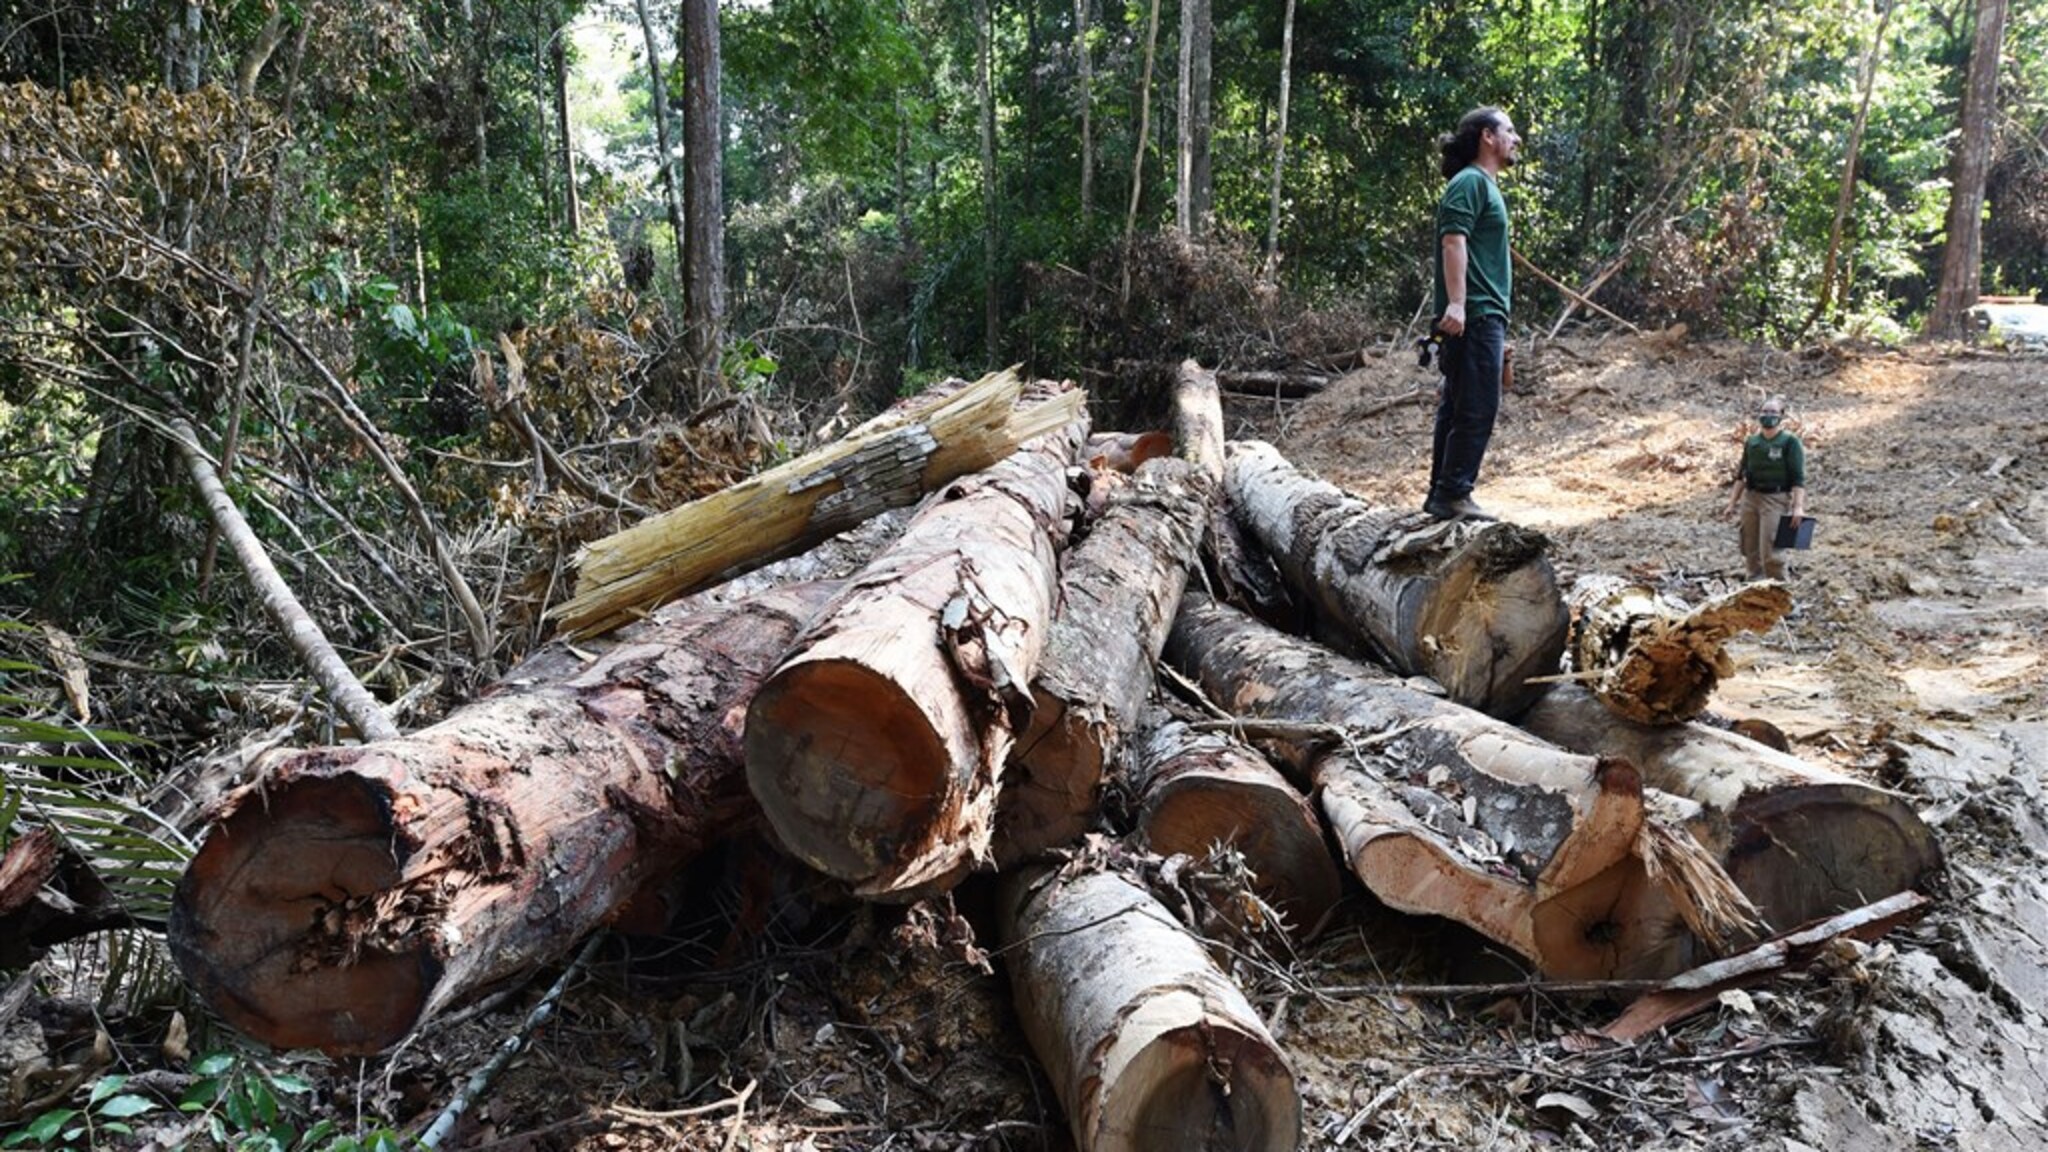 Most deforestation in the Brazilian Amazon is 15 years old